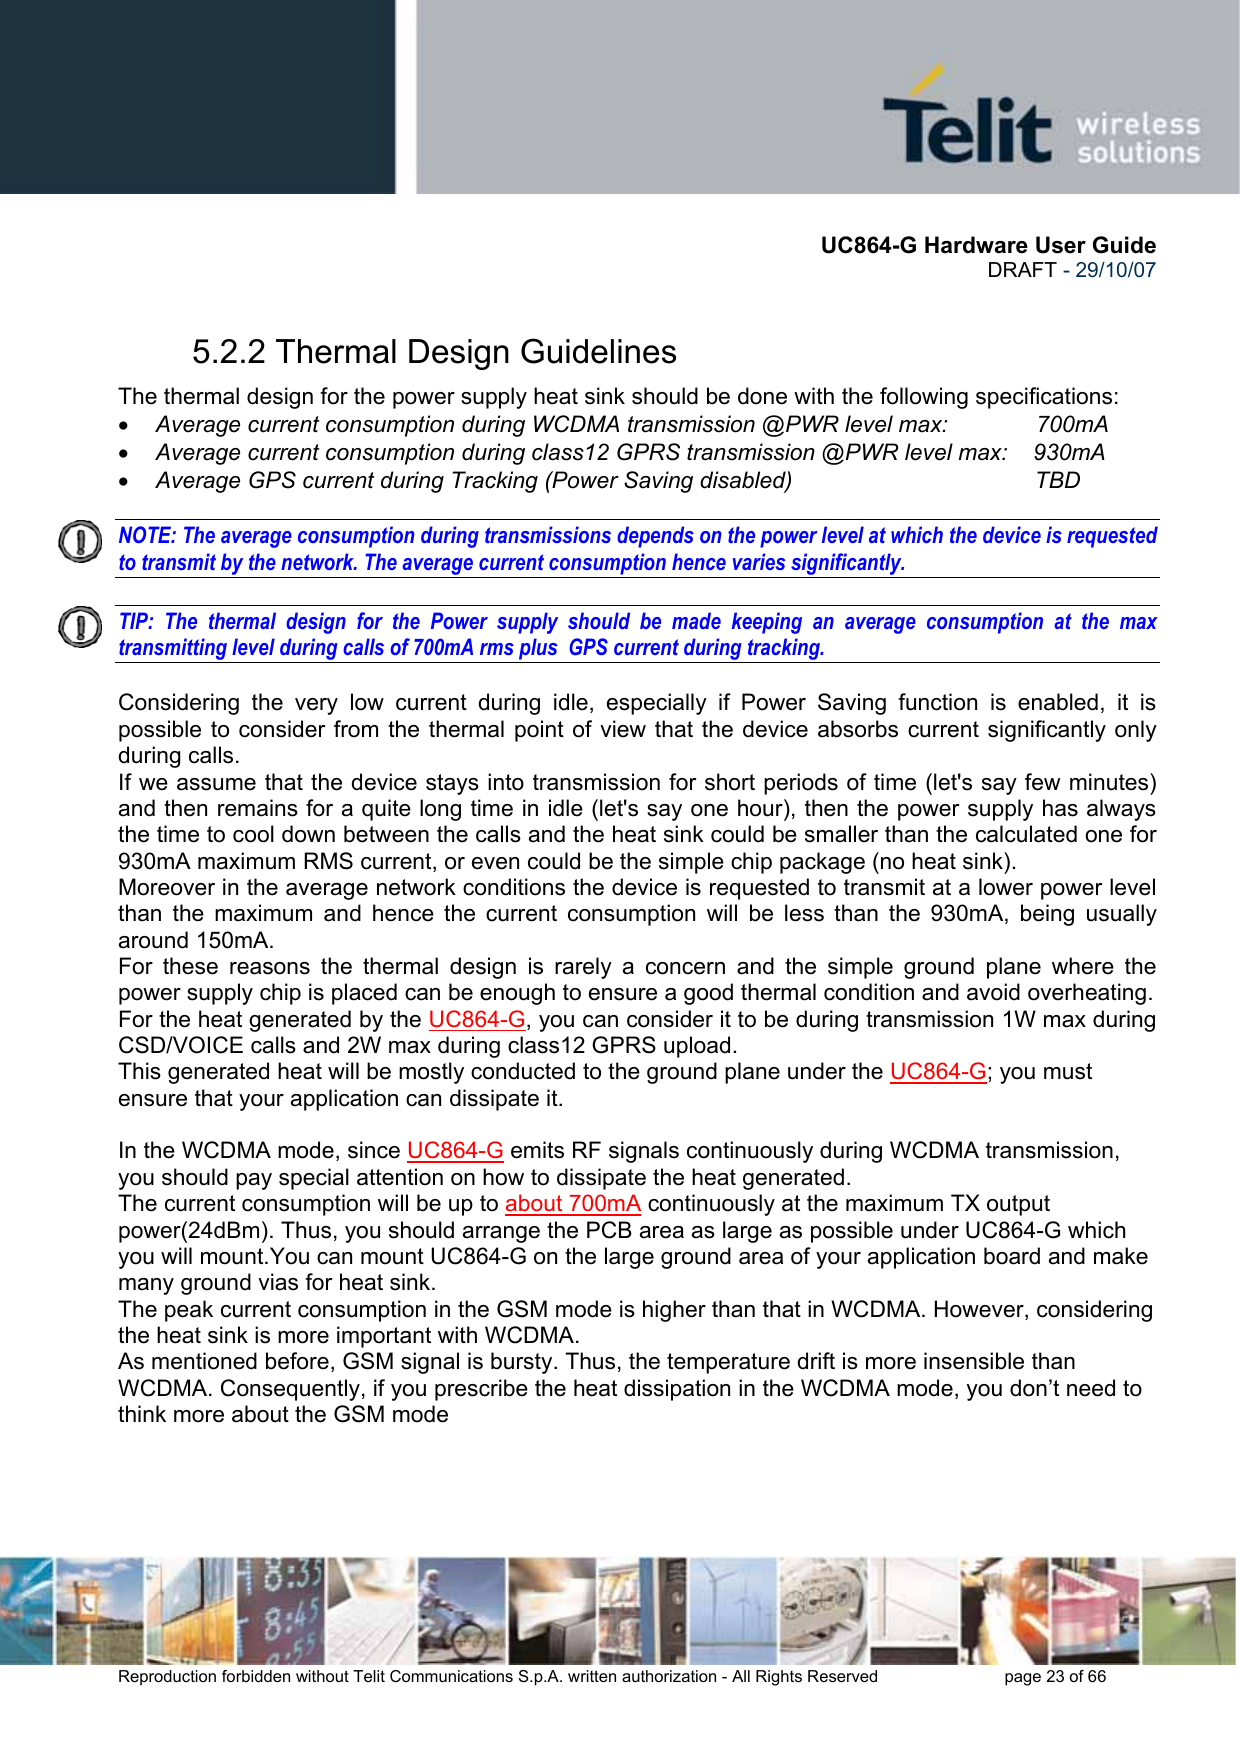       UC864-G Hardware User Guide  DRAFT - 29/10/07      Reproduction forbidden without Telit Communications S.p.A. written authorization - All Rights Reserved    page 23 of 66  5.2.2 Thermal Design Guidelines The thermal design for the power supply heat sink should be done with the following specifications: • Average current consumption during WCDMA transmission @PWR level max:       700mA • Average current consumption during class12 GPRS transmission @PWR level max:    930mA • Average GPS current during Tracking (Power Saving disabled)                                      TBD  NOTE: The average consumption during transmissions depends on the power level at which the device is requested to transmit by the network. The average current consumption hence varies significantly.  TIP: The thermal design for the Power supply should be made keeping an average consumption at the max transmitting level during calls of 700mA rms plus  GPS current during tracking.  Considering the very low current during idle, especially if Power Saving function is enabled, it is possible to consider from the thermal point of view that the device absorbs current significantly only during calls.  If we assume that the device stays into transmission for short periods of time (let&apos;s say few minutes) and then remains for a quite long time in idle (let&apos;s say one hour), then the power supply has always the time to cool down between the calls and the heat sink could be smaller than the calculated one for 930mA maximum RMS current, or even could be the simple chip package (no heat sink). Moreover in the average network conditions the device is requested to transmit at a lower power level than the maximum and hence the current consumption will be less than the 930mA, being usually around 150mA. For these reasons the thermal design is rarely a concern and the simple ground plane where the power supply chip is placed can be enough to ensure a good thermal condition and avoid overheating.  For the heat generated by the UC864-G, you can consider it to be during transmission 1W max during CSD/VOICE calls and 2W max during class12 GPRS upload.  This generated heat will be mostly conducted to the ground plane under the UC864-G; you must ensure that your application can dissipate it.  In the WCDMA mode, since UC864-G emits RF signals continuously during WCDMA transmission, you should pay special attention on how to dissipate the heat generated.  The current consumption will be up to about 700mA continuously at the maximum TX output power(24dBm). Thus, you should arrange the PCB area as large as possible under UC864-G which you will mount.You can mount UC864-G on the large ground area of your application board and make many ground vias for heat sink. The peak current consumption in the GSM mode is higher than that in WCDMA. However, considering the heat sink is more important with WCDMA. As mentioned before, GSM signal is bursty. Thus, the temperature drift is more insensible than WCDMA. Consequently, if you prescribe the heat dissipation in the WCDMA mode, you don’t need to think more about the GSM mode 